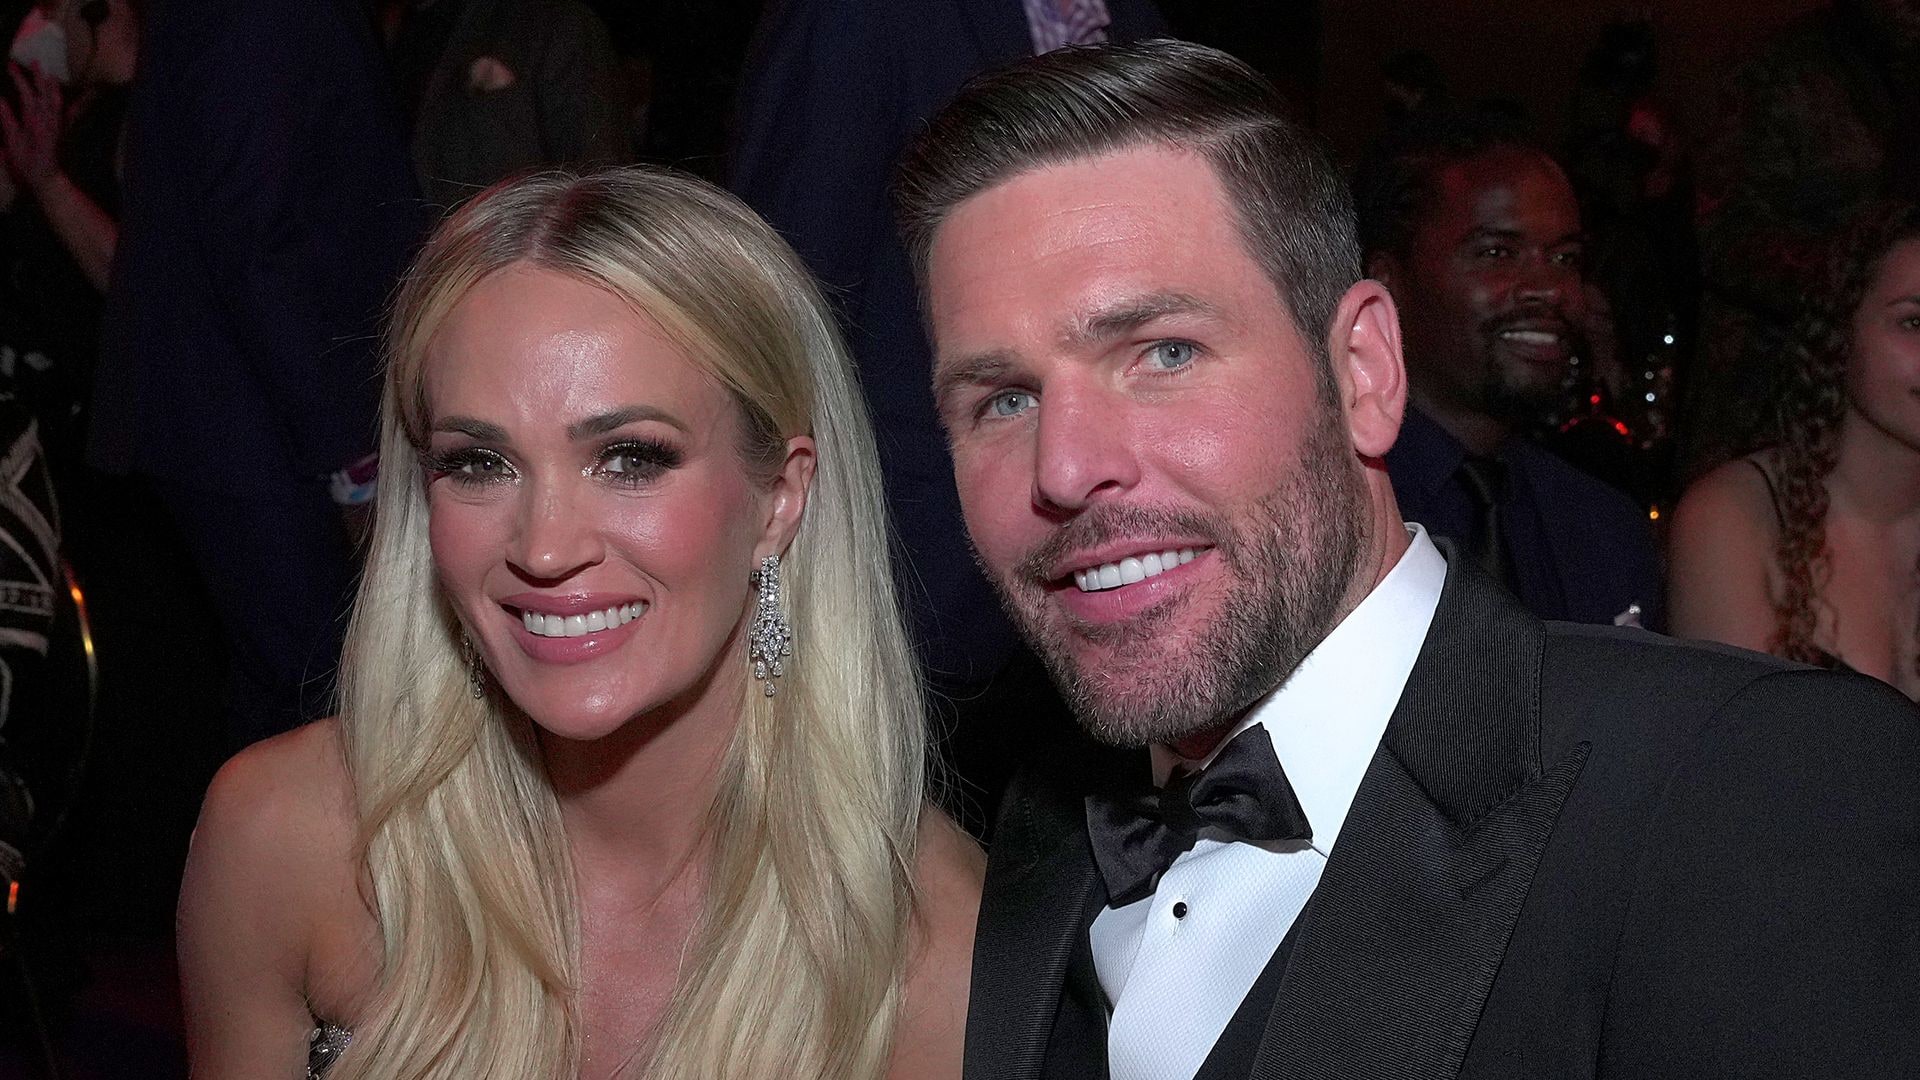 Carrie Underwood is joined by husband Mike Fisher on the red